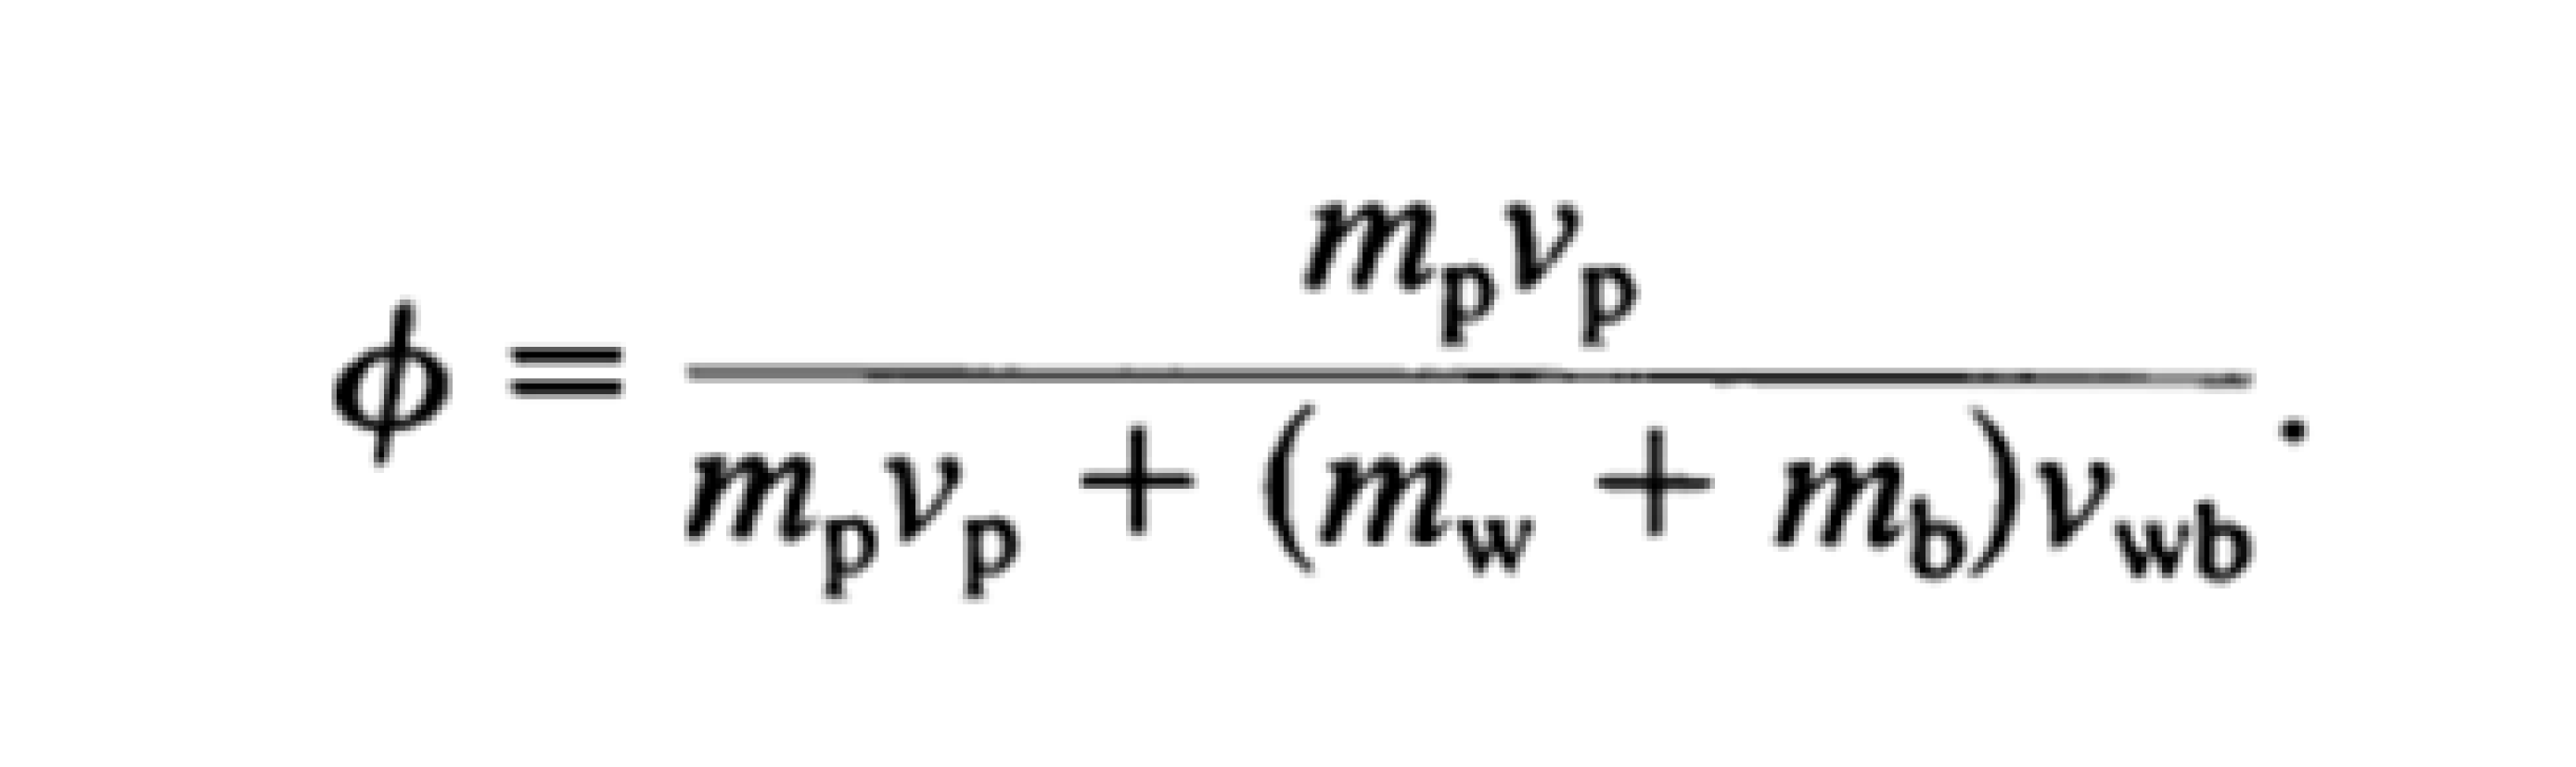 1equation.png